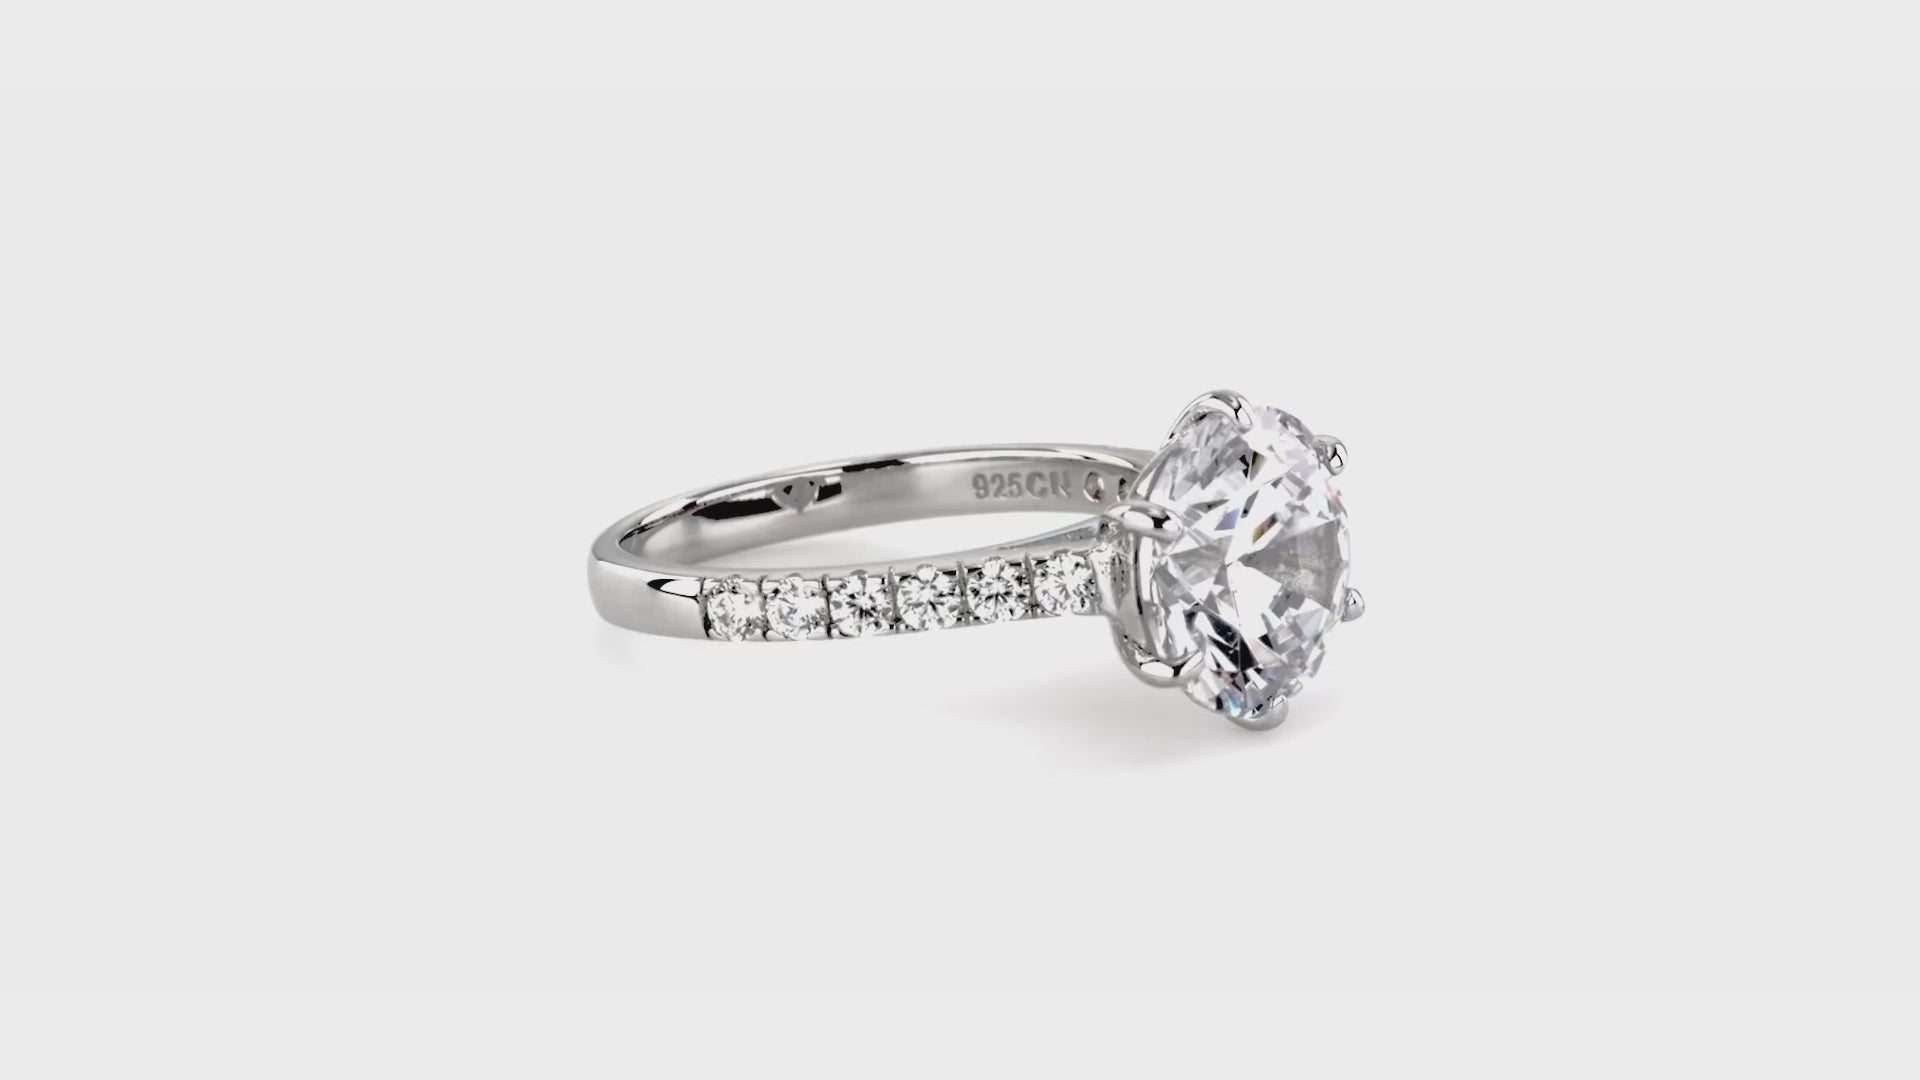 Video Contains 5-Stone Solitaire CZ Ring Set in Sterling Silver. Style Number VR475-01